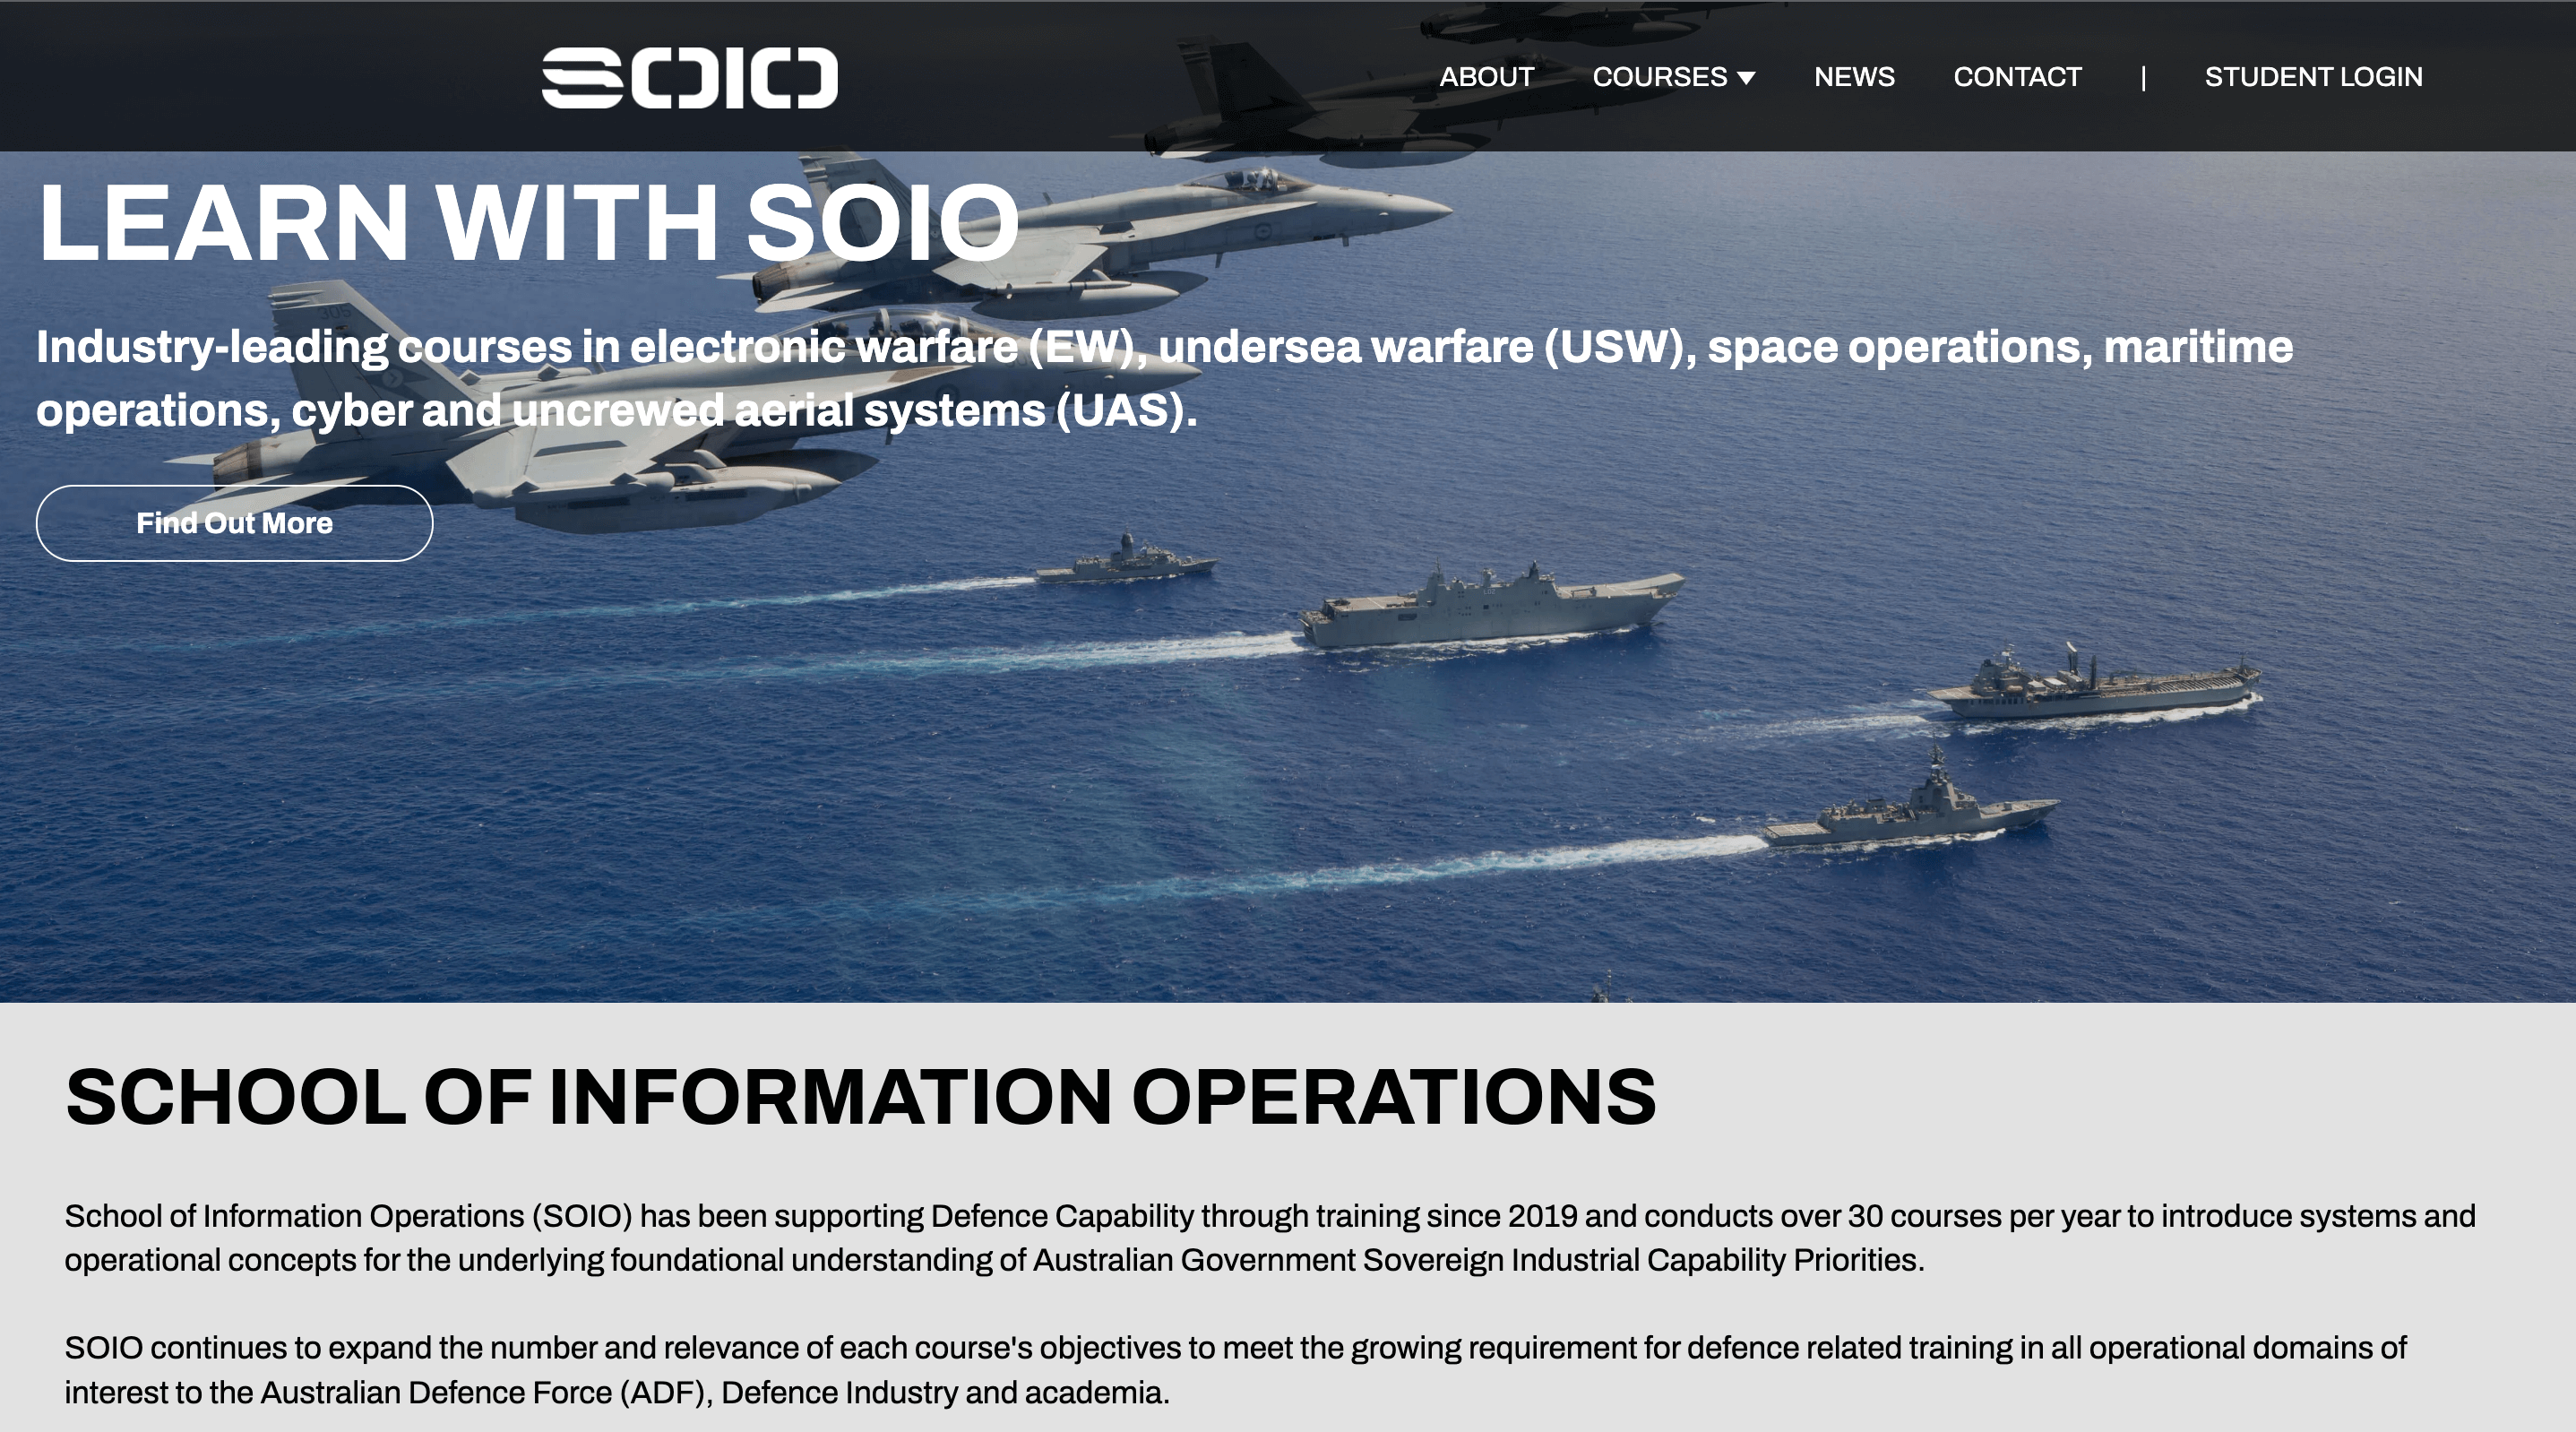 Screenshot of the SOIO website after Refuel worked on it